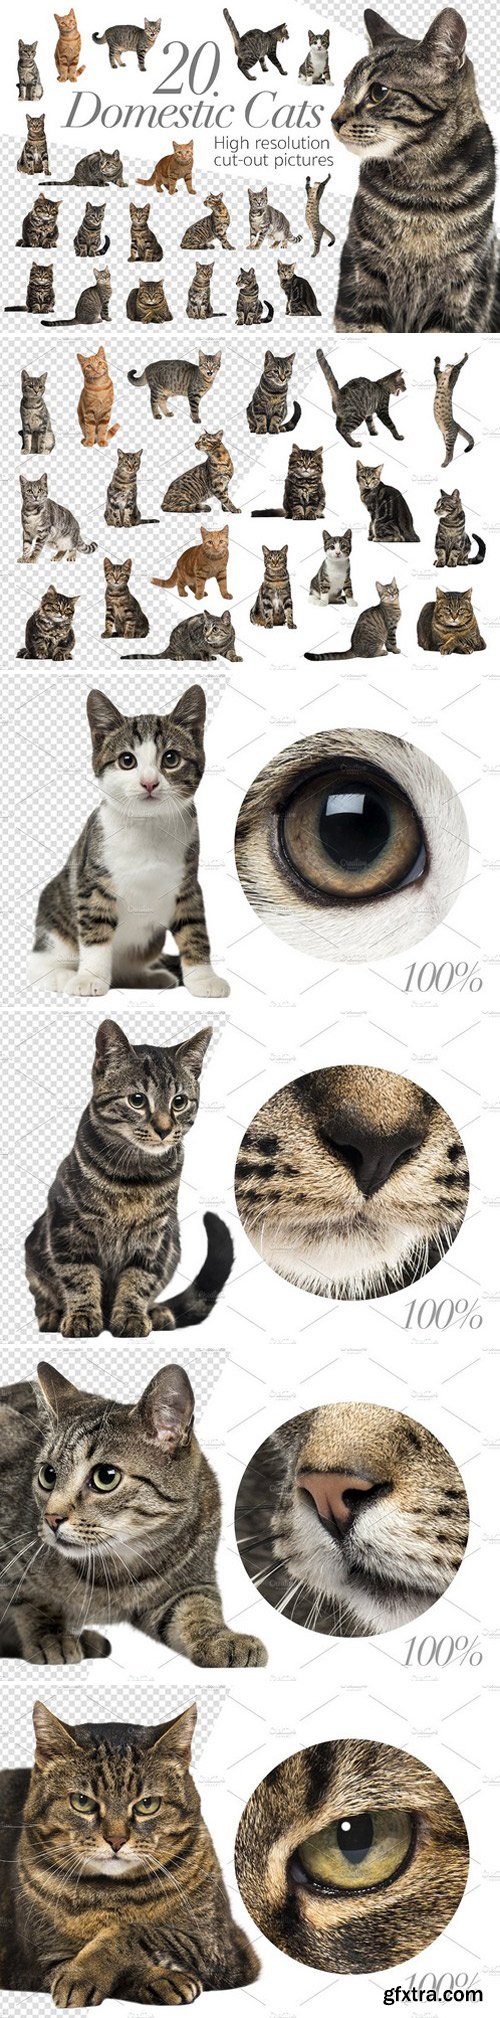 CM - 20 Domestic Cats - Cut-out Pictures 2316524